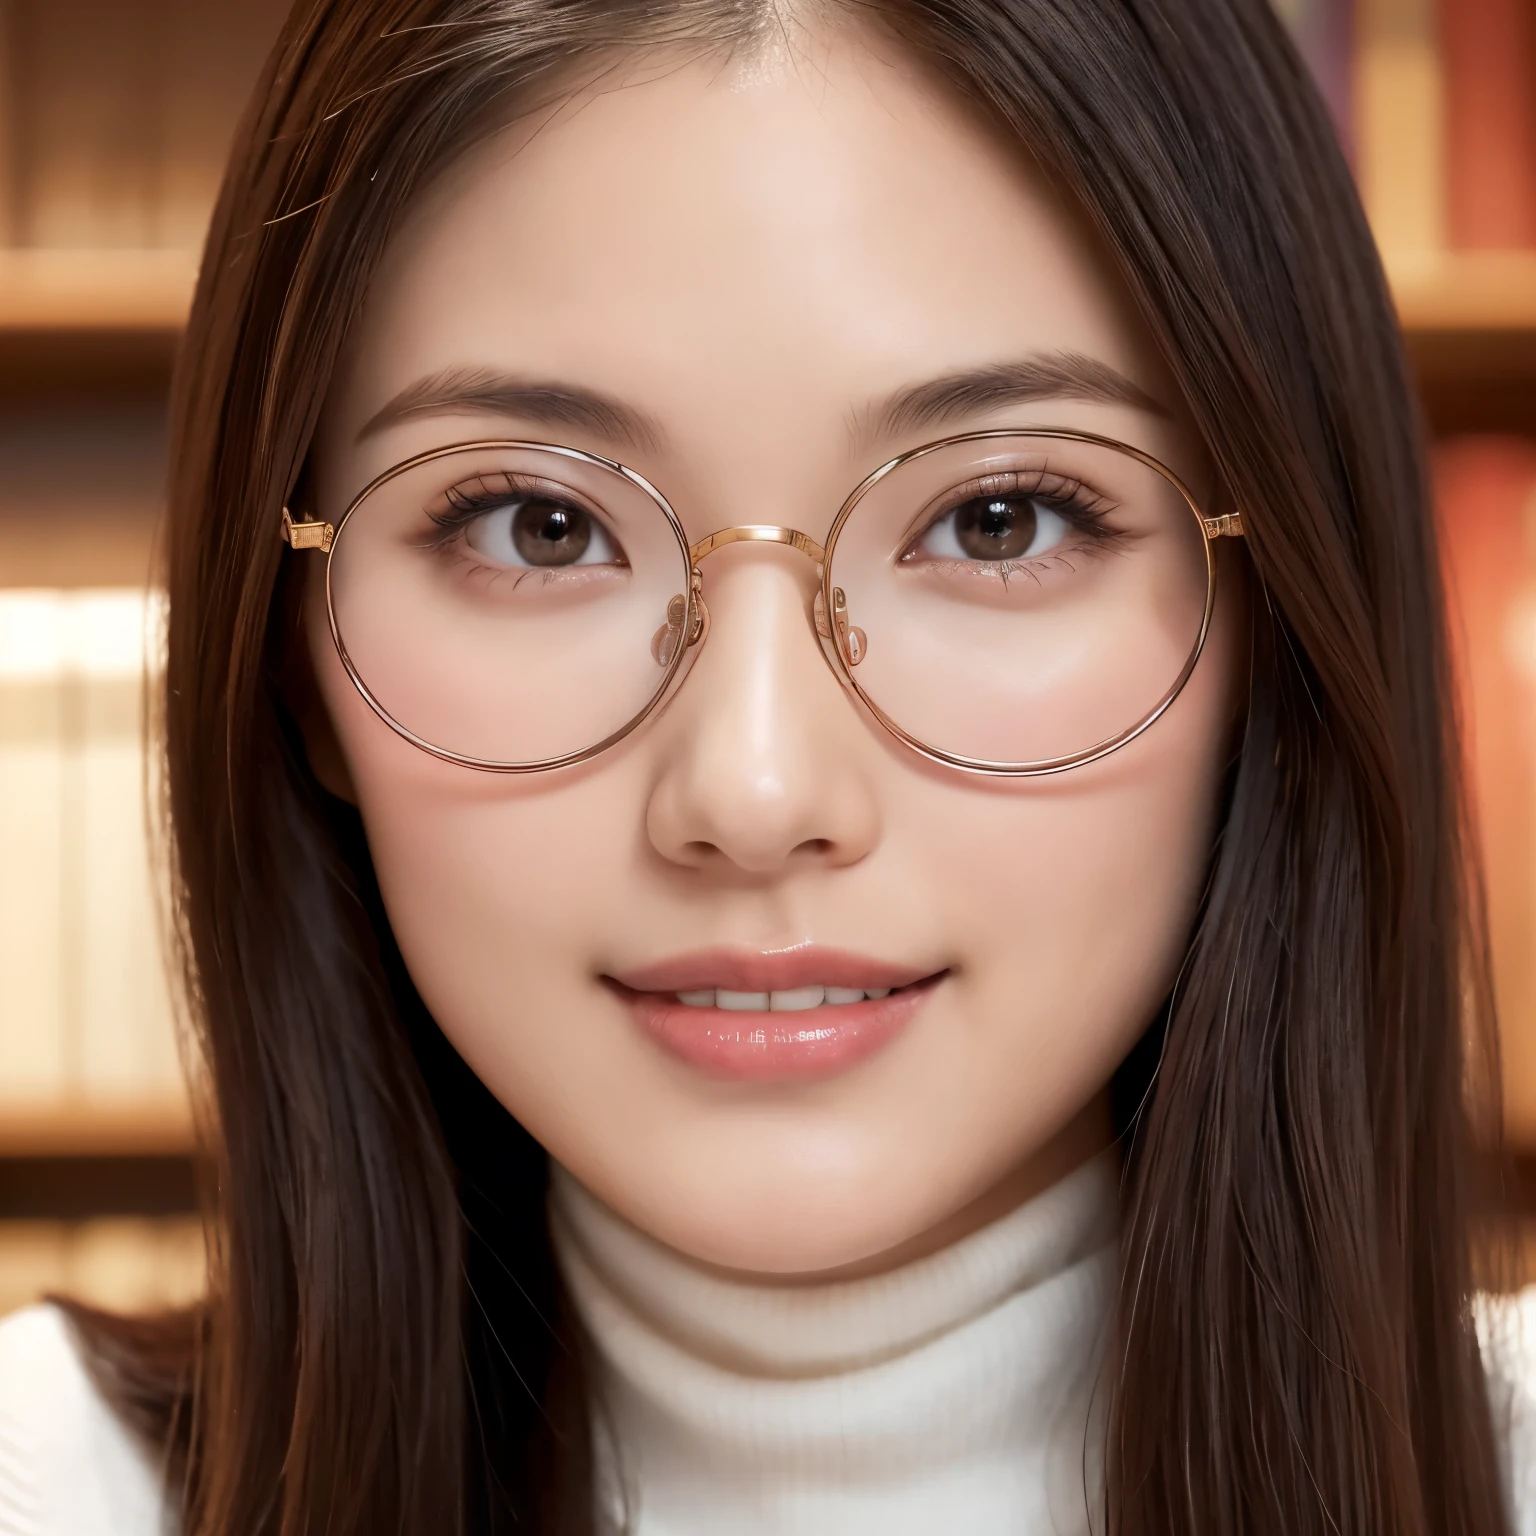 (highest quality、table top、8k、best image quality、Award-winning work)、one beautiful woman、25 years old、alone、perfect beautiful composition、perfect fit、(close up of face:1.3)、(emphasize body line:1.1)、(Perfect Turtleneck Sleeveless Knit Sweater:1.2)、(Perfect and precise turtleneck sleeveless knit sweater:1.1)、(very big breasts:1.1)、Tight mini skirt made of elegant melton fabric、(Perfect round elegant round glasses:1.2)、slender body、elegant medium hair、smile looking at me、(strongly blurred library background:1.1)、standing gracefully in the library、perfect and accurate bookshelf、The most natural and perfect library interior、natural makeup、Ultra high definition beauty face、ultra high definition hair、Super high-definition sparkling eyes、(Shining ultra-high definition beautiful skin:1.1)、Super high resolution glossy lips、accurate anatomy、ultra high definition hair、(closed lips:1.1)